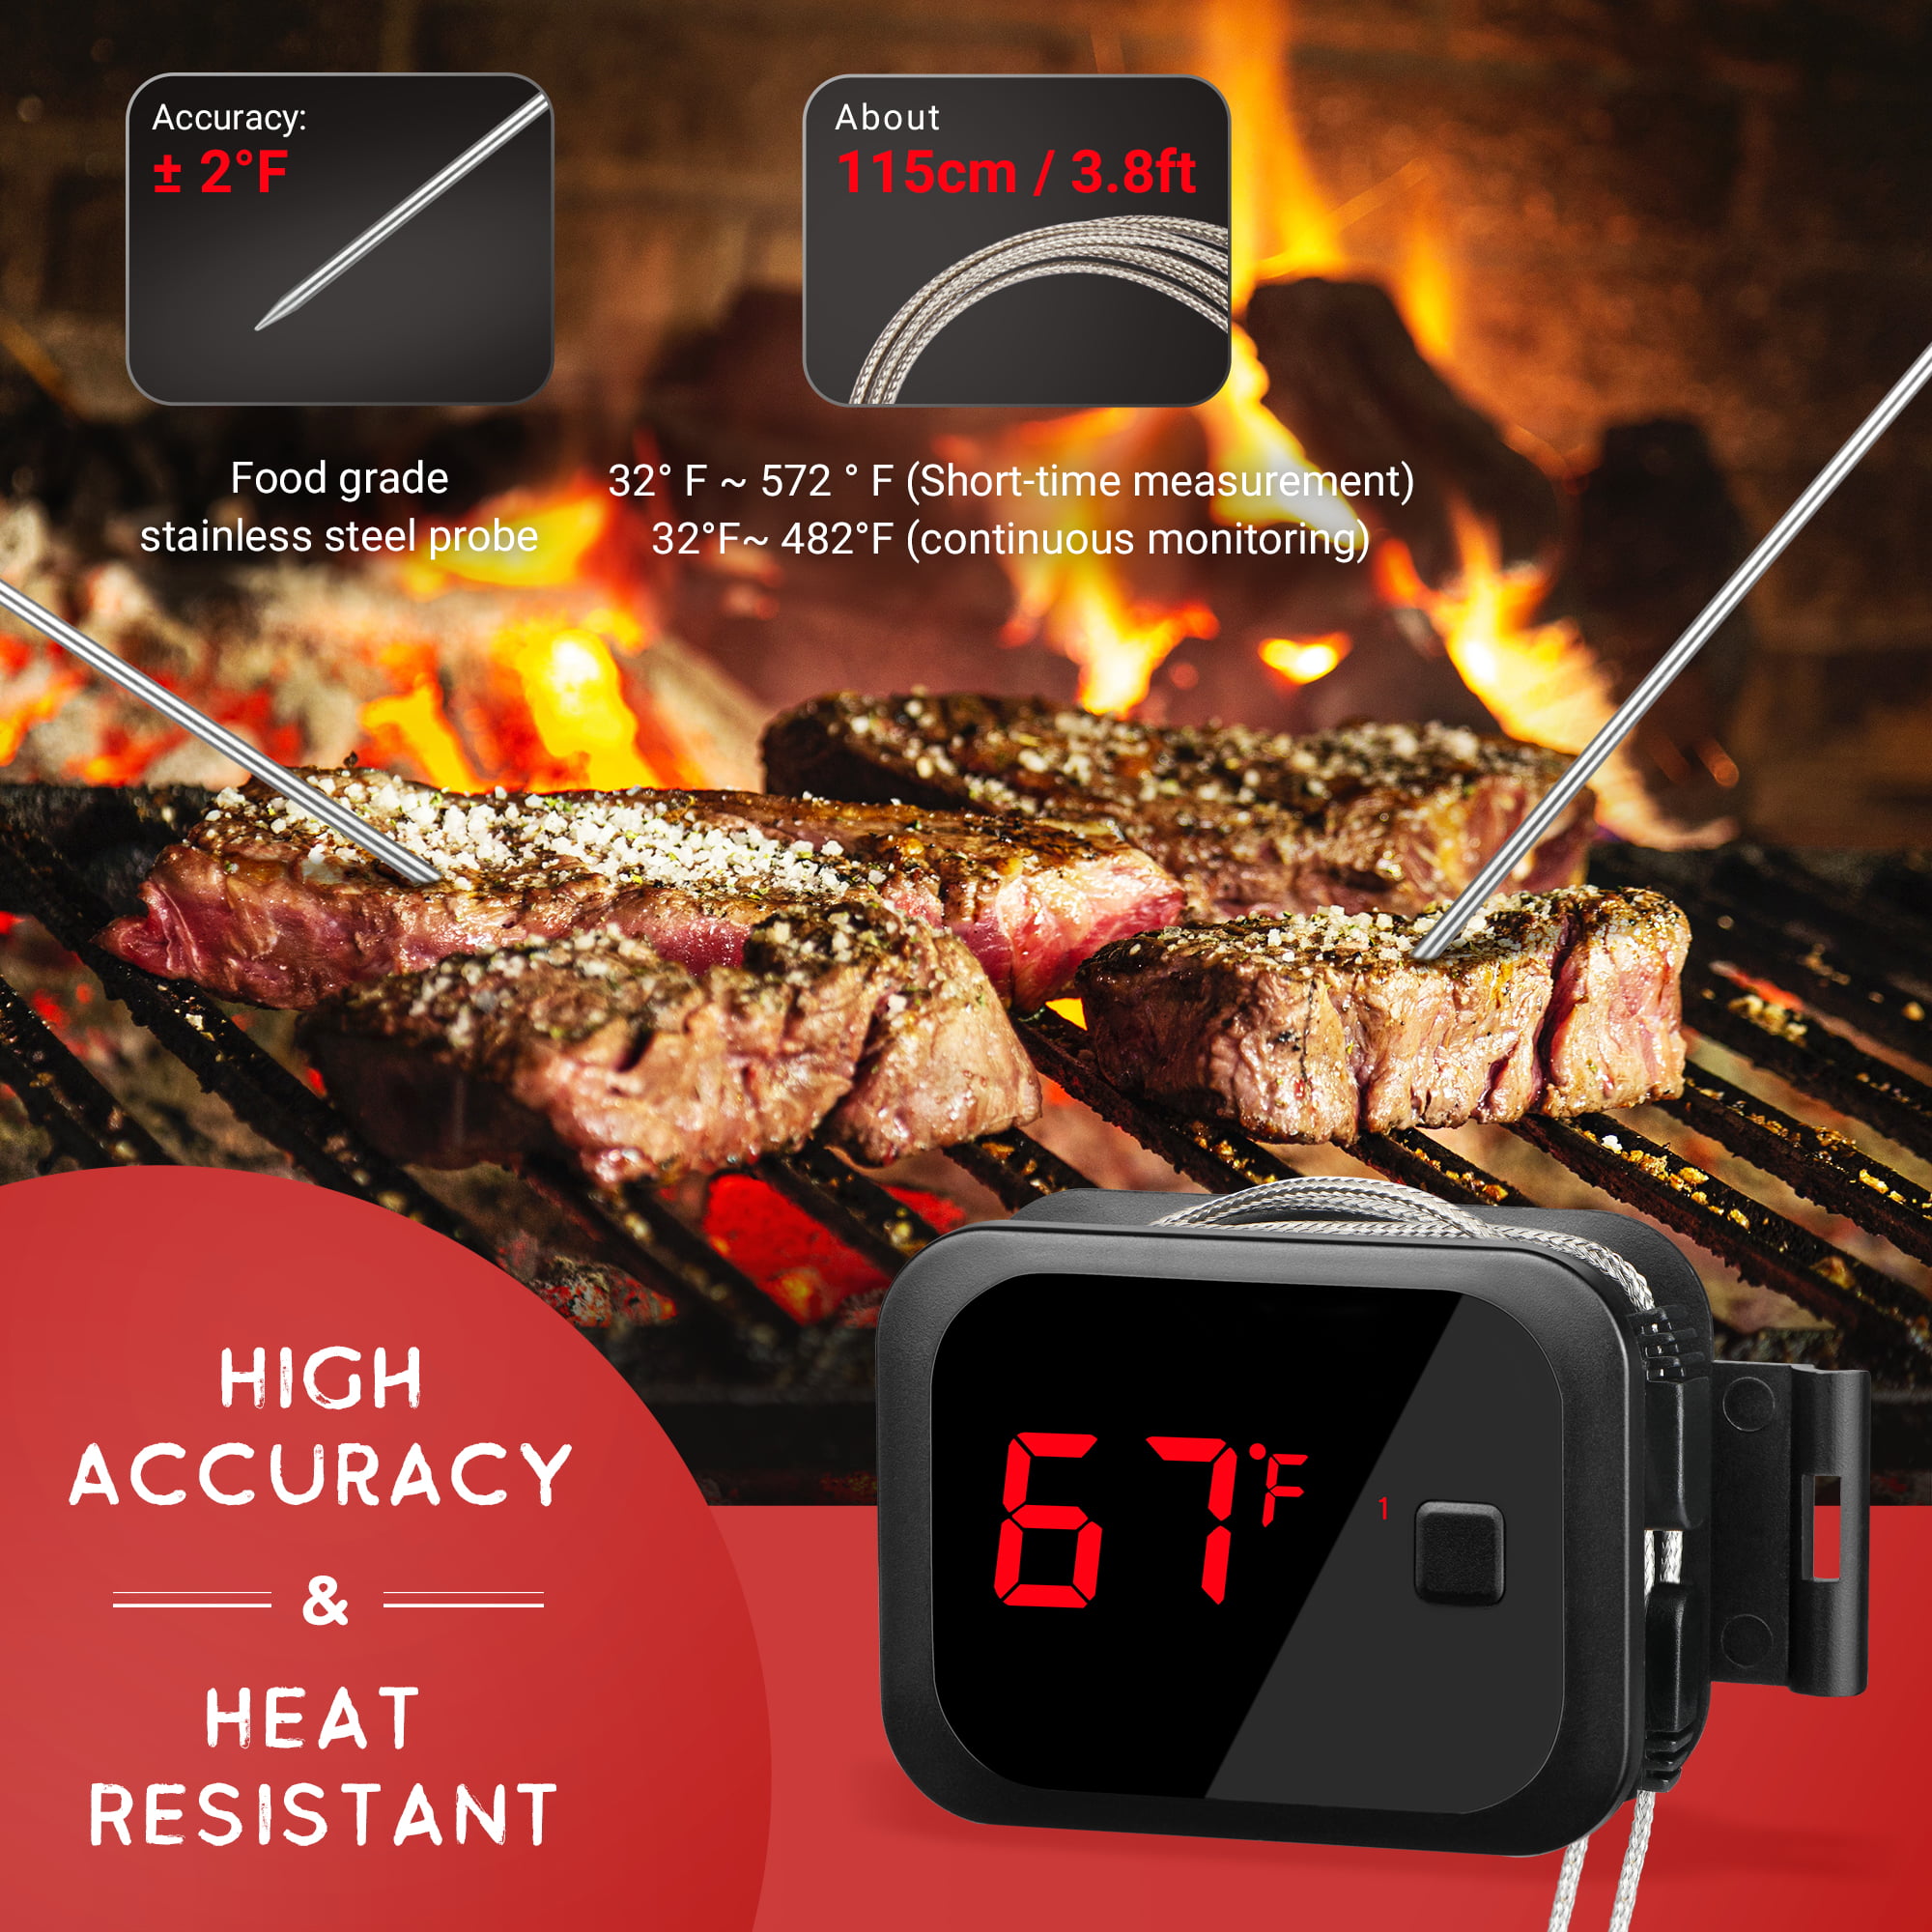 INKBIRD Hybrid Thermometer Between a Remote Bluetooth BBQ Meat Thermometer  with 2 Probes and an Instant-Read Thermometer,Rechargeable Grill